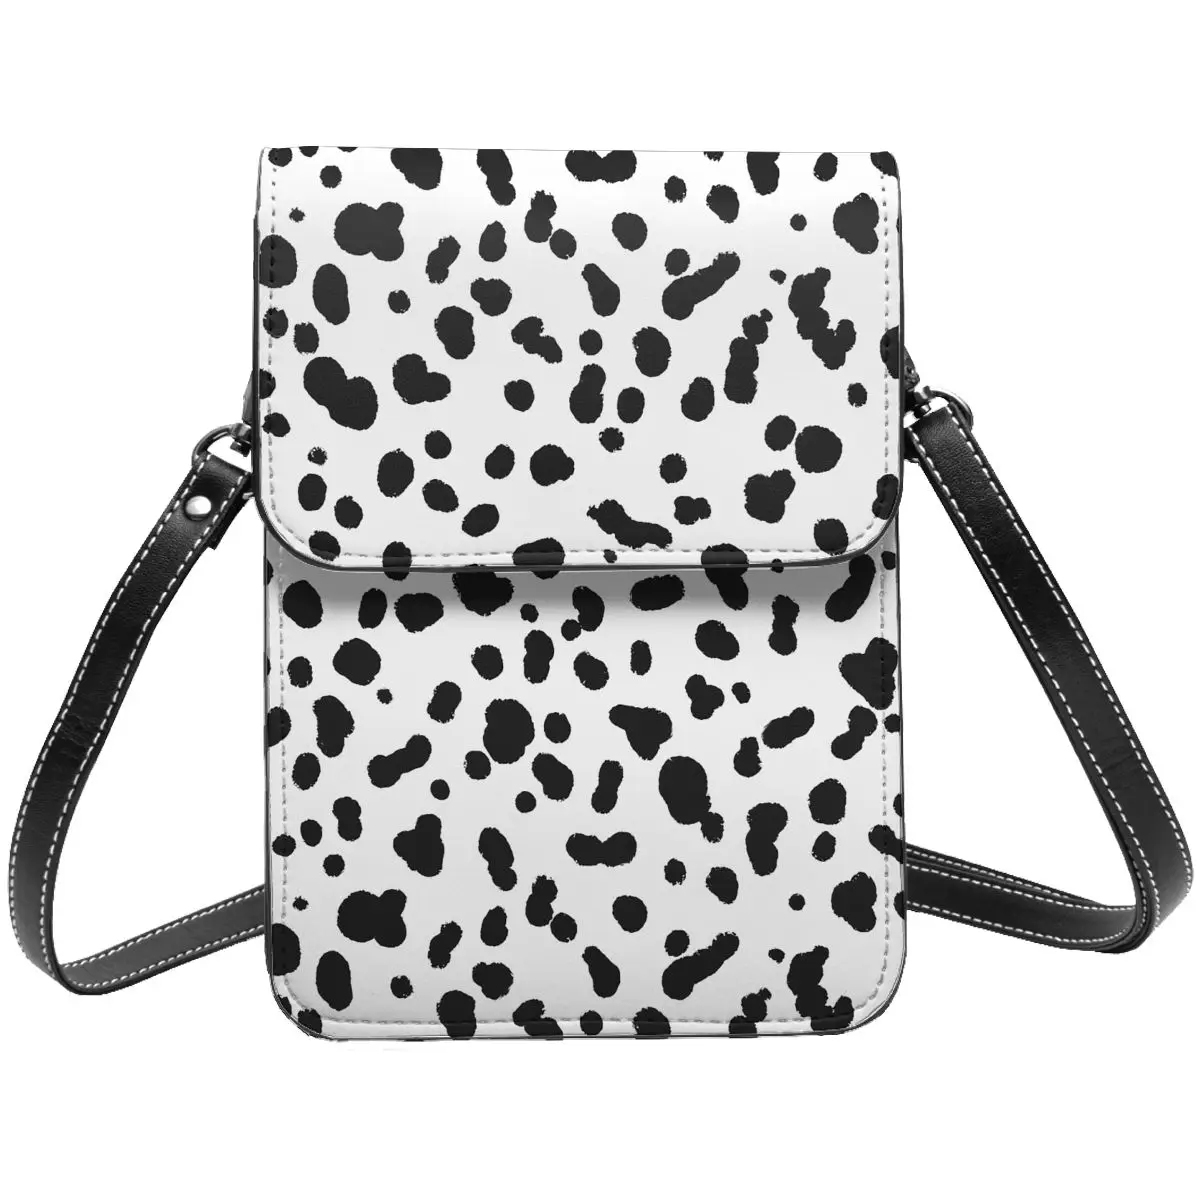 

Dalmatian Shoulder Bag Black And White Spots Streetwear Leather Mobile Phone Bag Woman Gift Stylish Bags